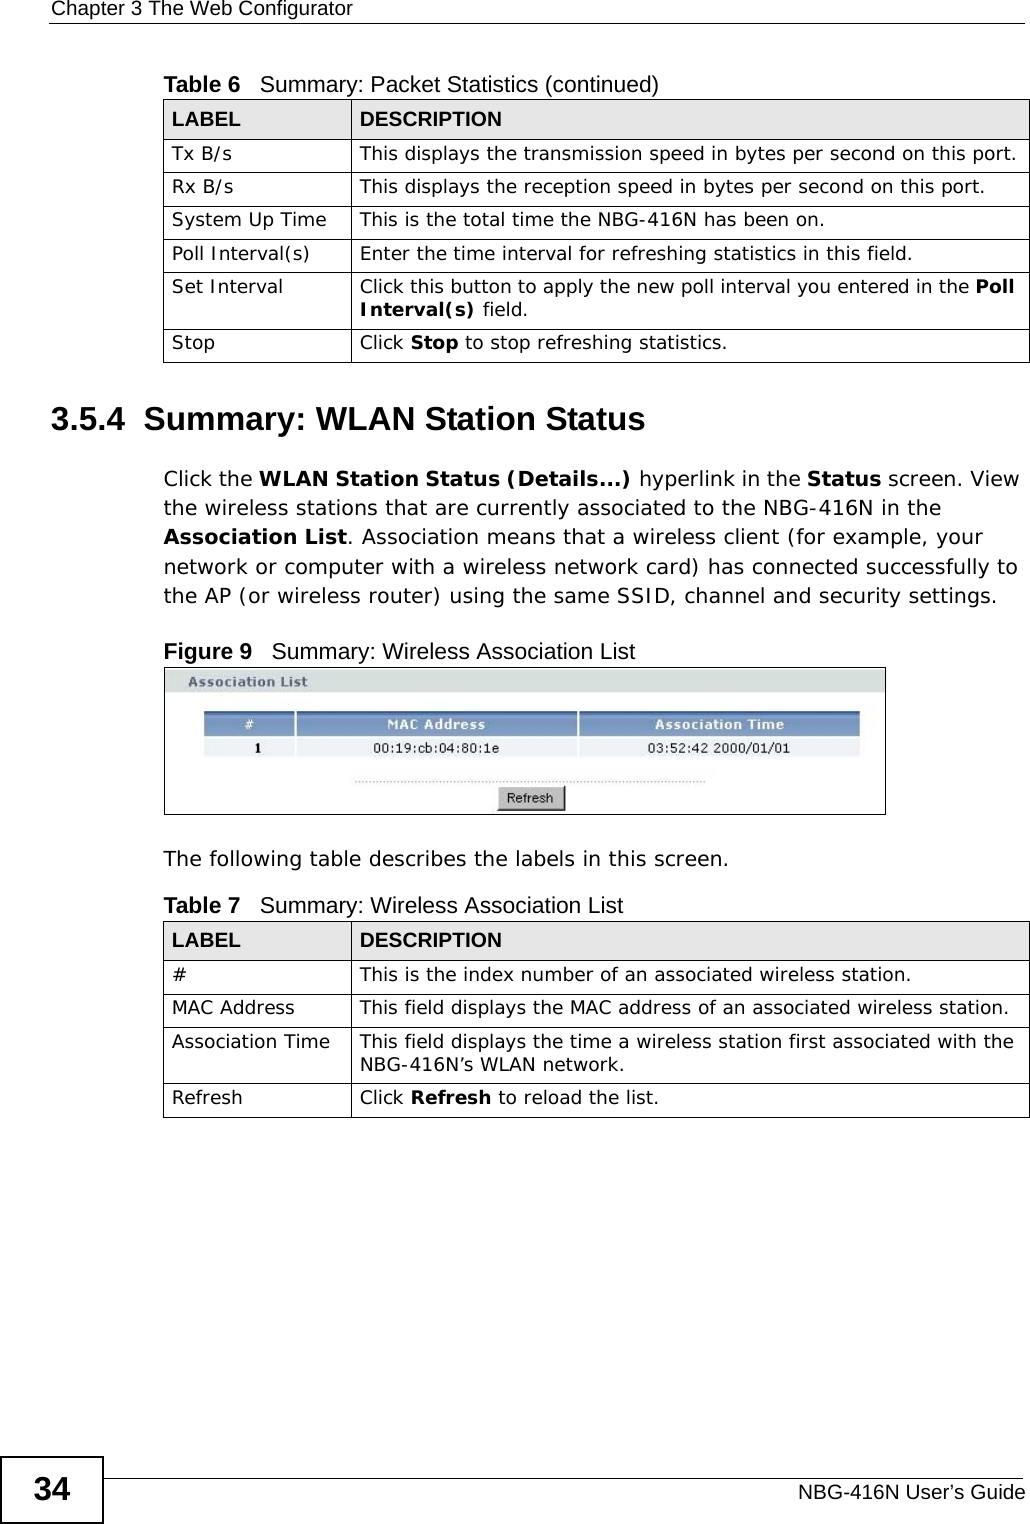 Chapter 3 The Web ConfiguratorNBG-416N User’s Guide343.5.4  Summary: WLAN Station Status     Click the WLAN Station Status (Details...) hyperlink in the Status screen. View the wireless stations that are currently associated to the NBG-416N in the Association List. Association means that a wireless client (for example, your network or computer with a wireless network card) has connected successfully to the AP (or wireless router) using the same SSID, channel and security settings.Figure 9   Summary: Wireless Association ListThe following table describes the labels in this screen.Tx B/s  This displays the transmission speed in bytes per second on this port.Rx B/s This displays the reception speed in bytes per second on this port.System Up Time This is the total time the NBG-416N has been on.Poll Interval(s) Enter the time interval for refreshing statistics in this field.Set Interval Click this button to apply the new poll interval you entered in the Poll Interval(s) field.Stop Click Stop to stop refreshing statistics.Table 6   Summary: Packet Statistics (continued)LABEL DESCRIPTIONTable 7   Summary: Wireless Association ListLABEL DESCRIPTION#  This is the index number of an associated wireless station. MAC Address  This field displays the MAC address of an associated wireless station.Association Time This field displays the time a wireless station first associated with the NBG-416N’s WLAN network.Refresh Click Refresh to reload the list. 